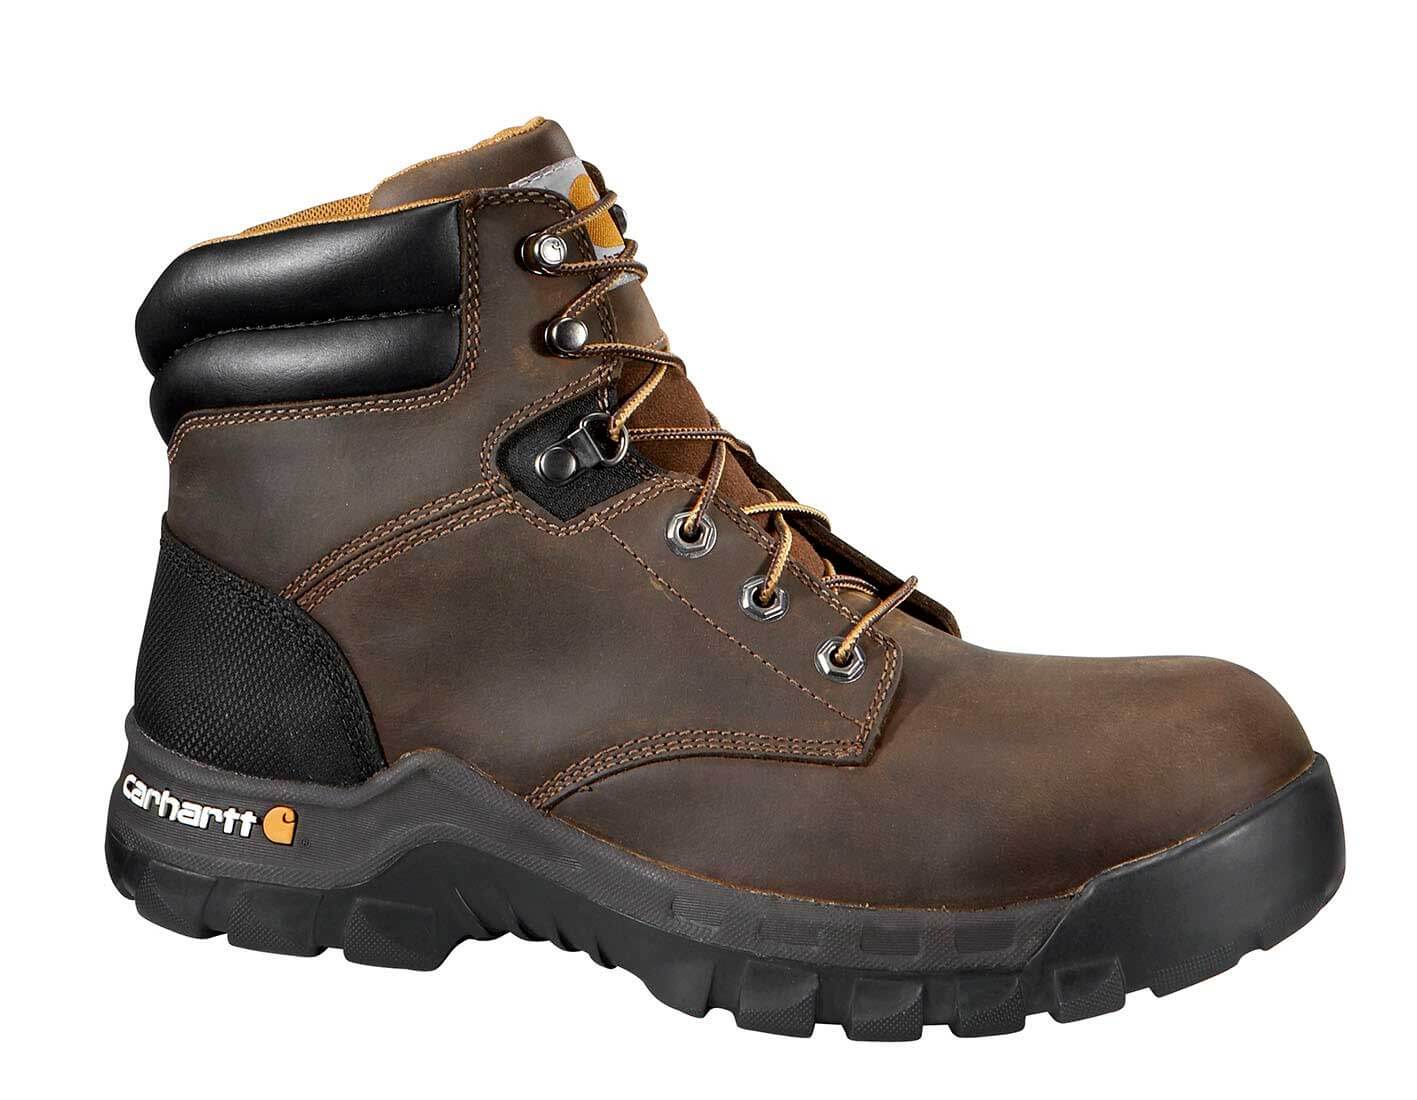 Carhartt - CMF6066 - Men's Rugged Flex Brown Leather NWP Soft Toe 6 Lace-up Work Boot